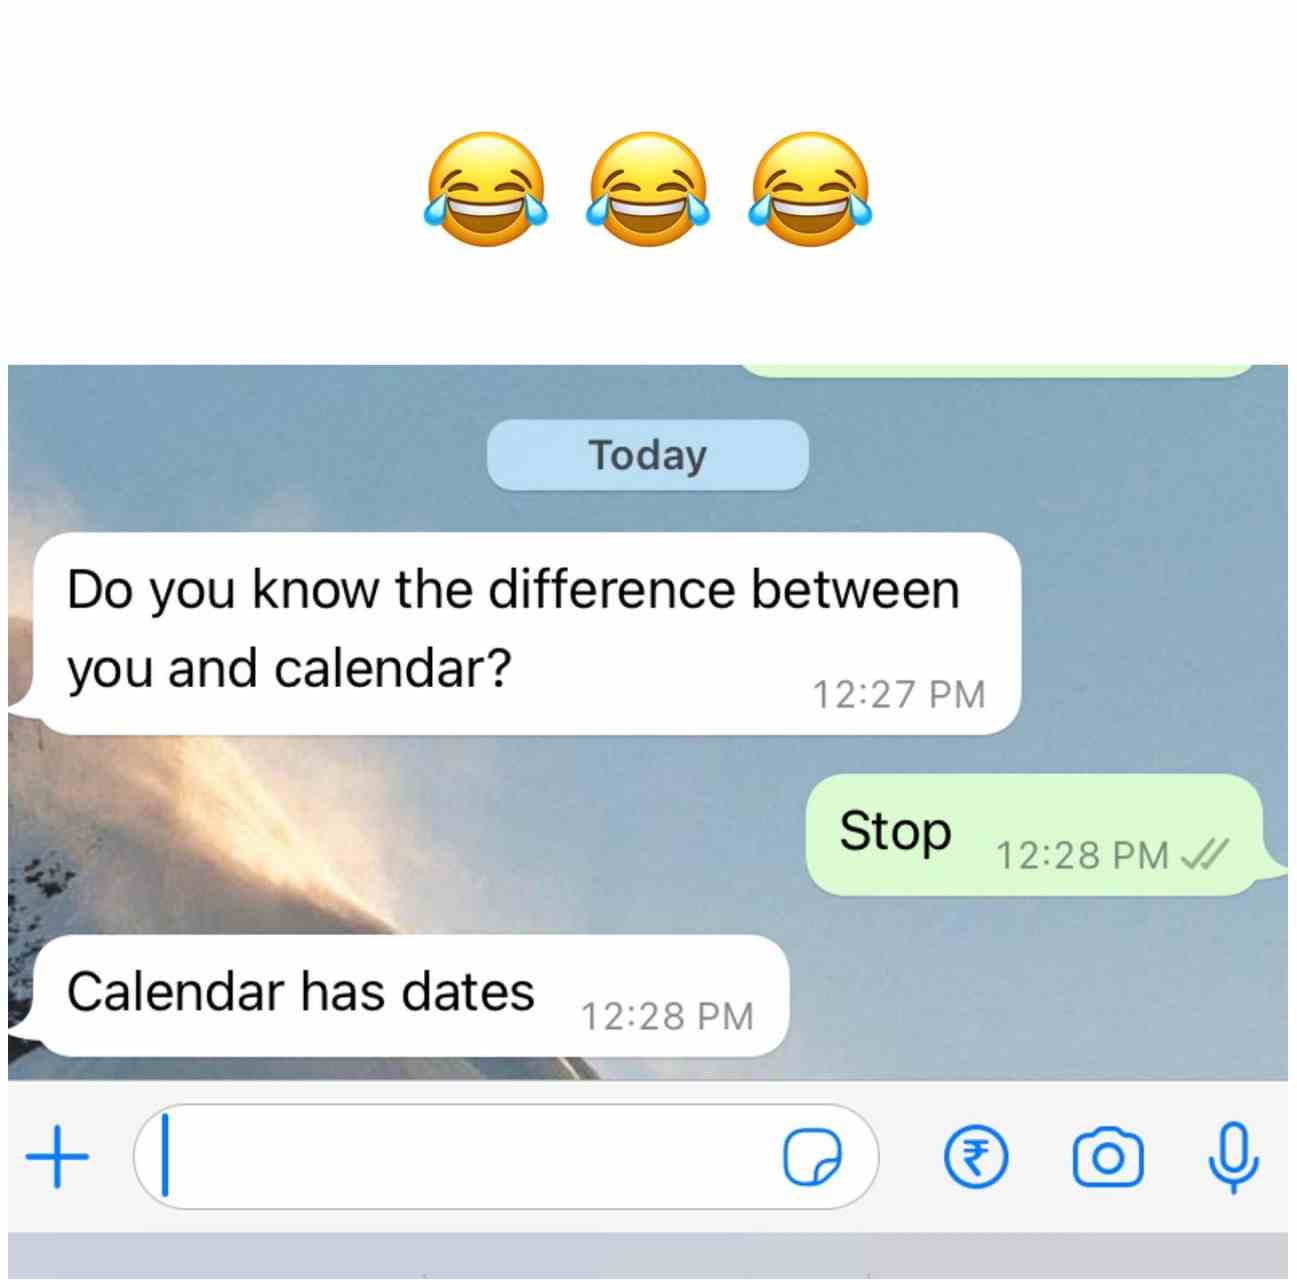 Do you know the difference between you and calendar?